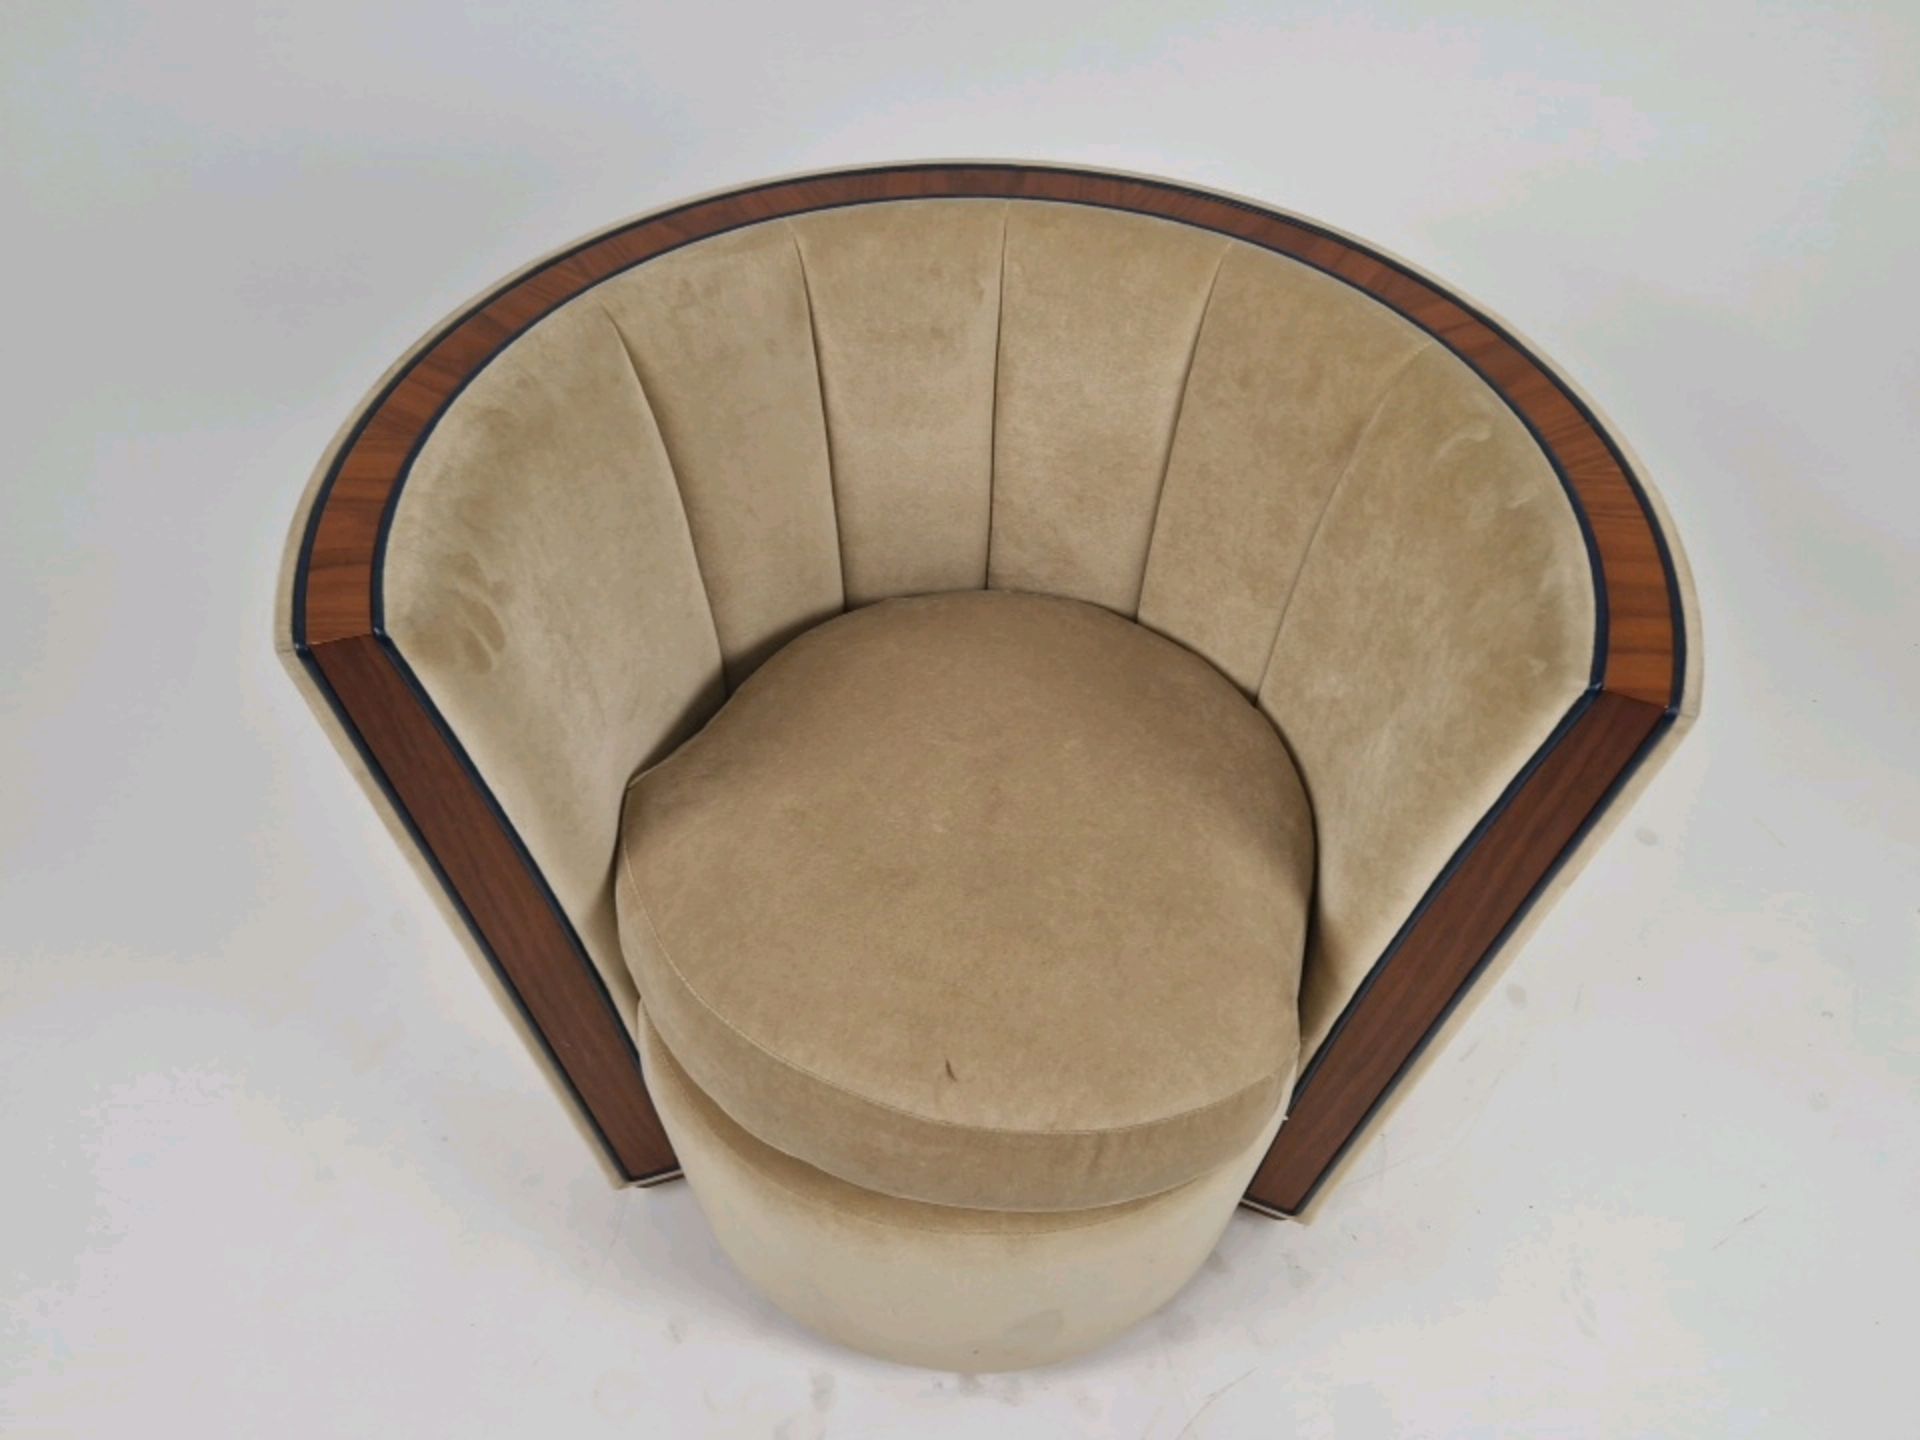 Bespoke David Linley Tub Chair Made for Claridge's Suites - Image 2 of 7